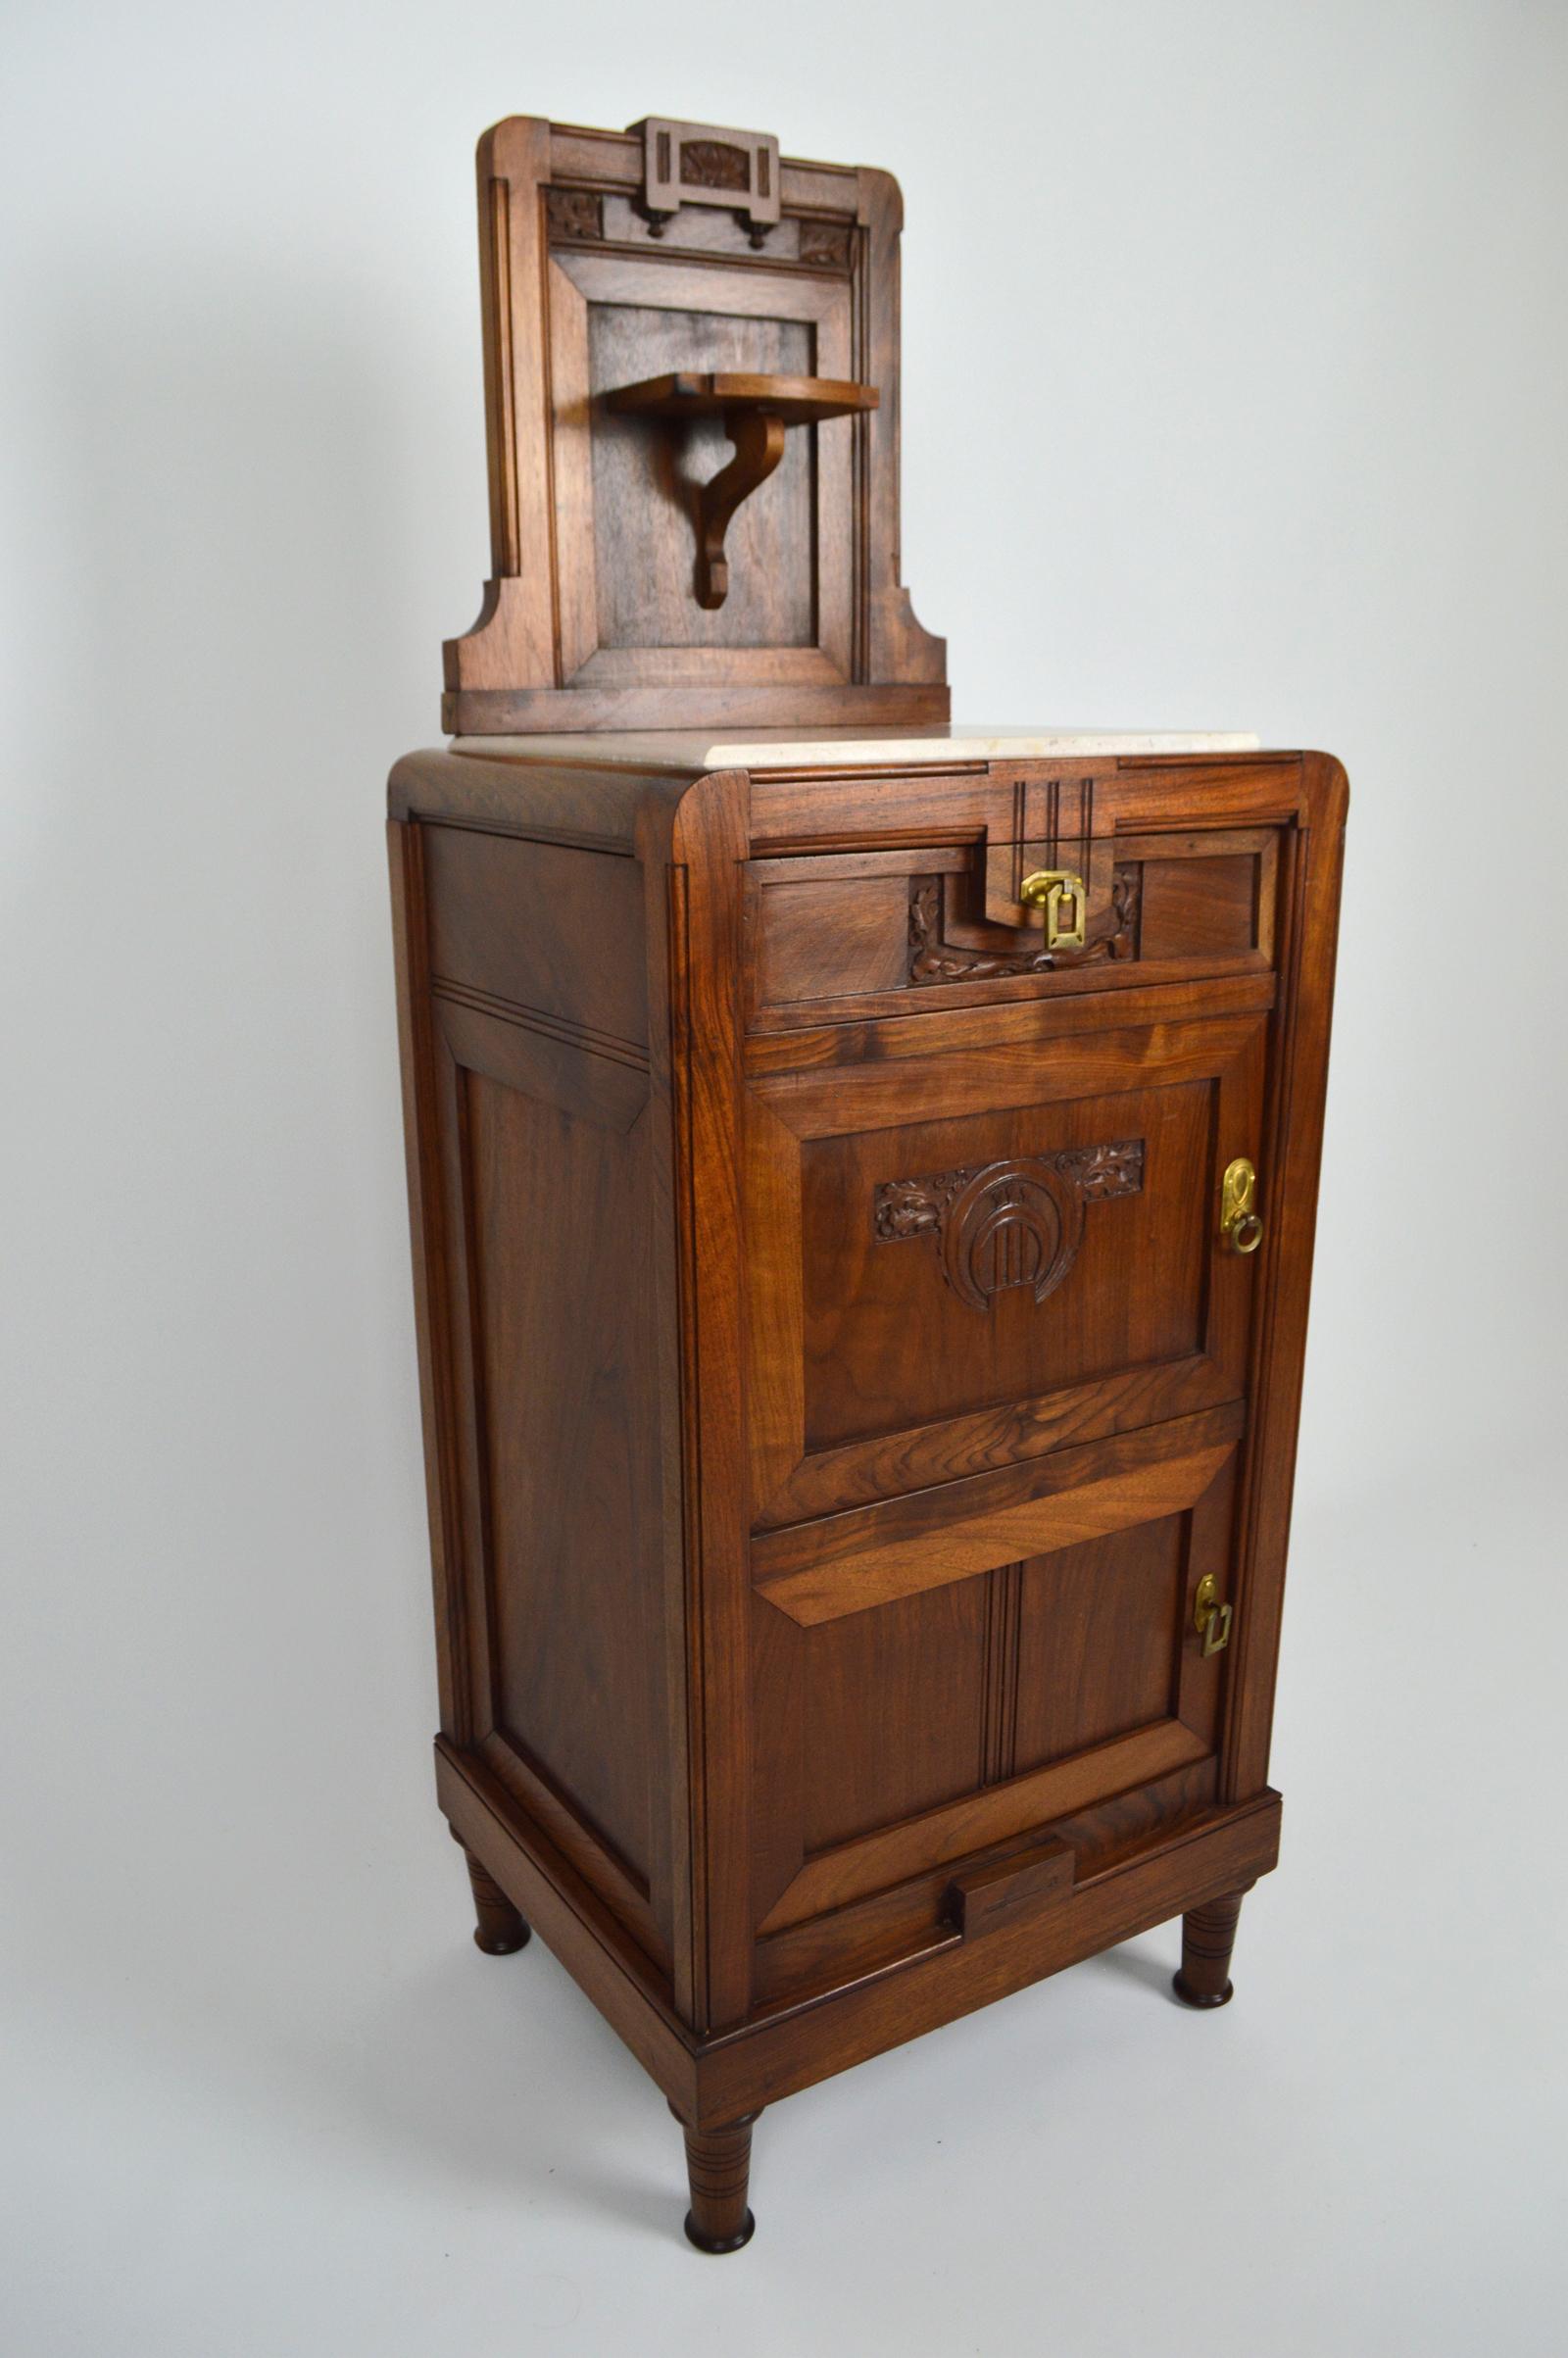 Amazing nightstand / bedside table in carved walnut with a marble top.
The bedside table consists of 1 drawer, 2 cupboards, 1 marble top and 1 shelf.
Patinated brass handles.

Art Nouveau / Stile Liberty, Italy, circa 1900.

Very good